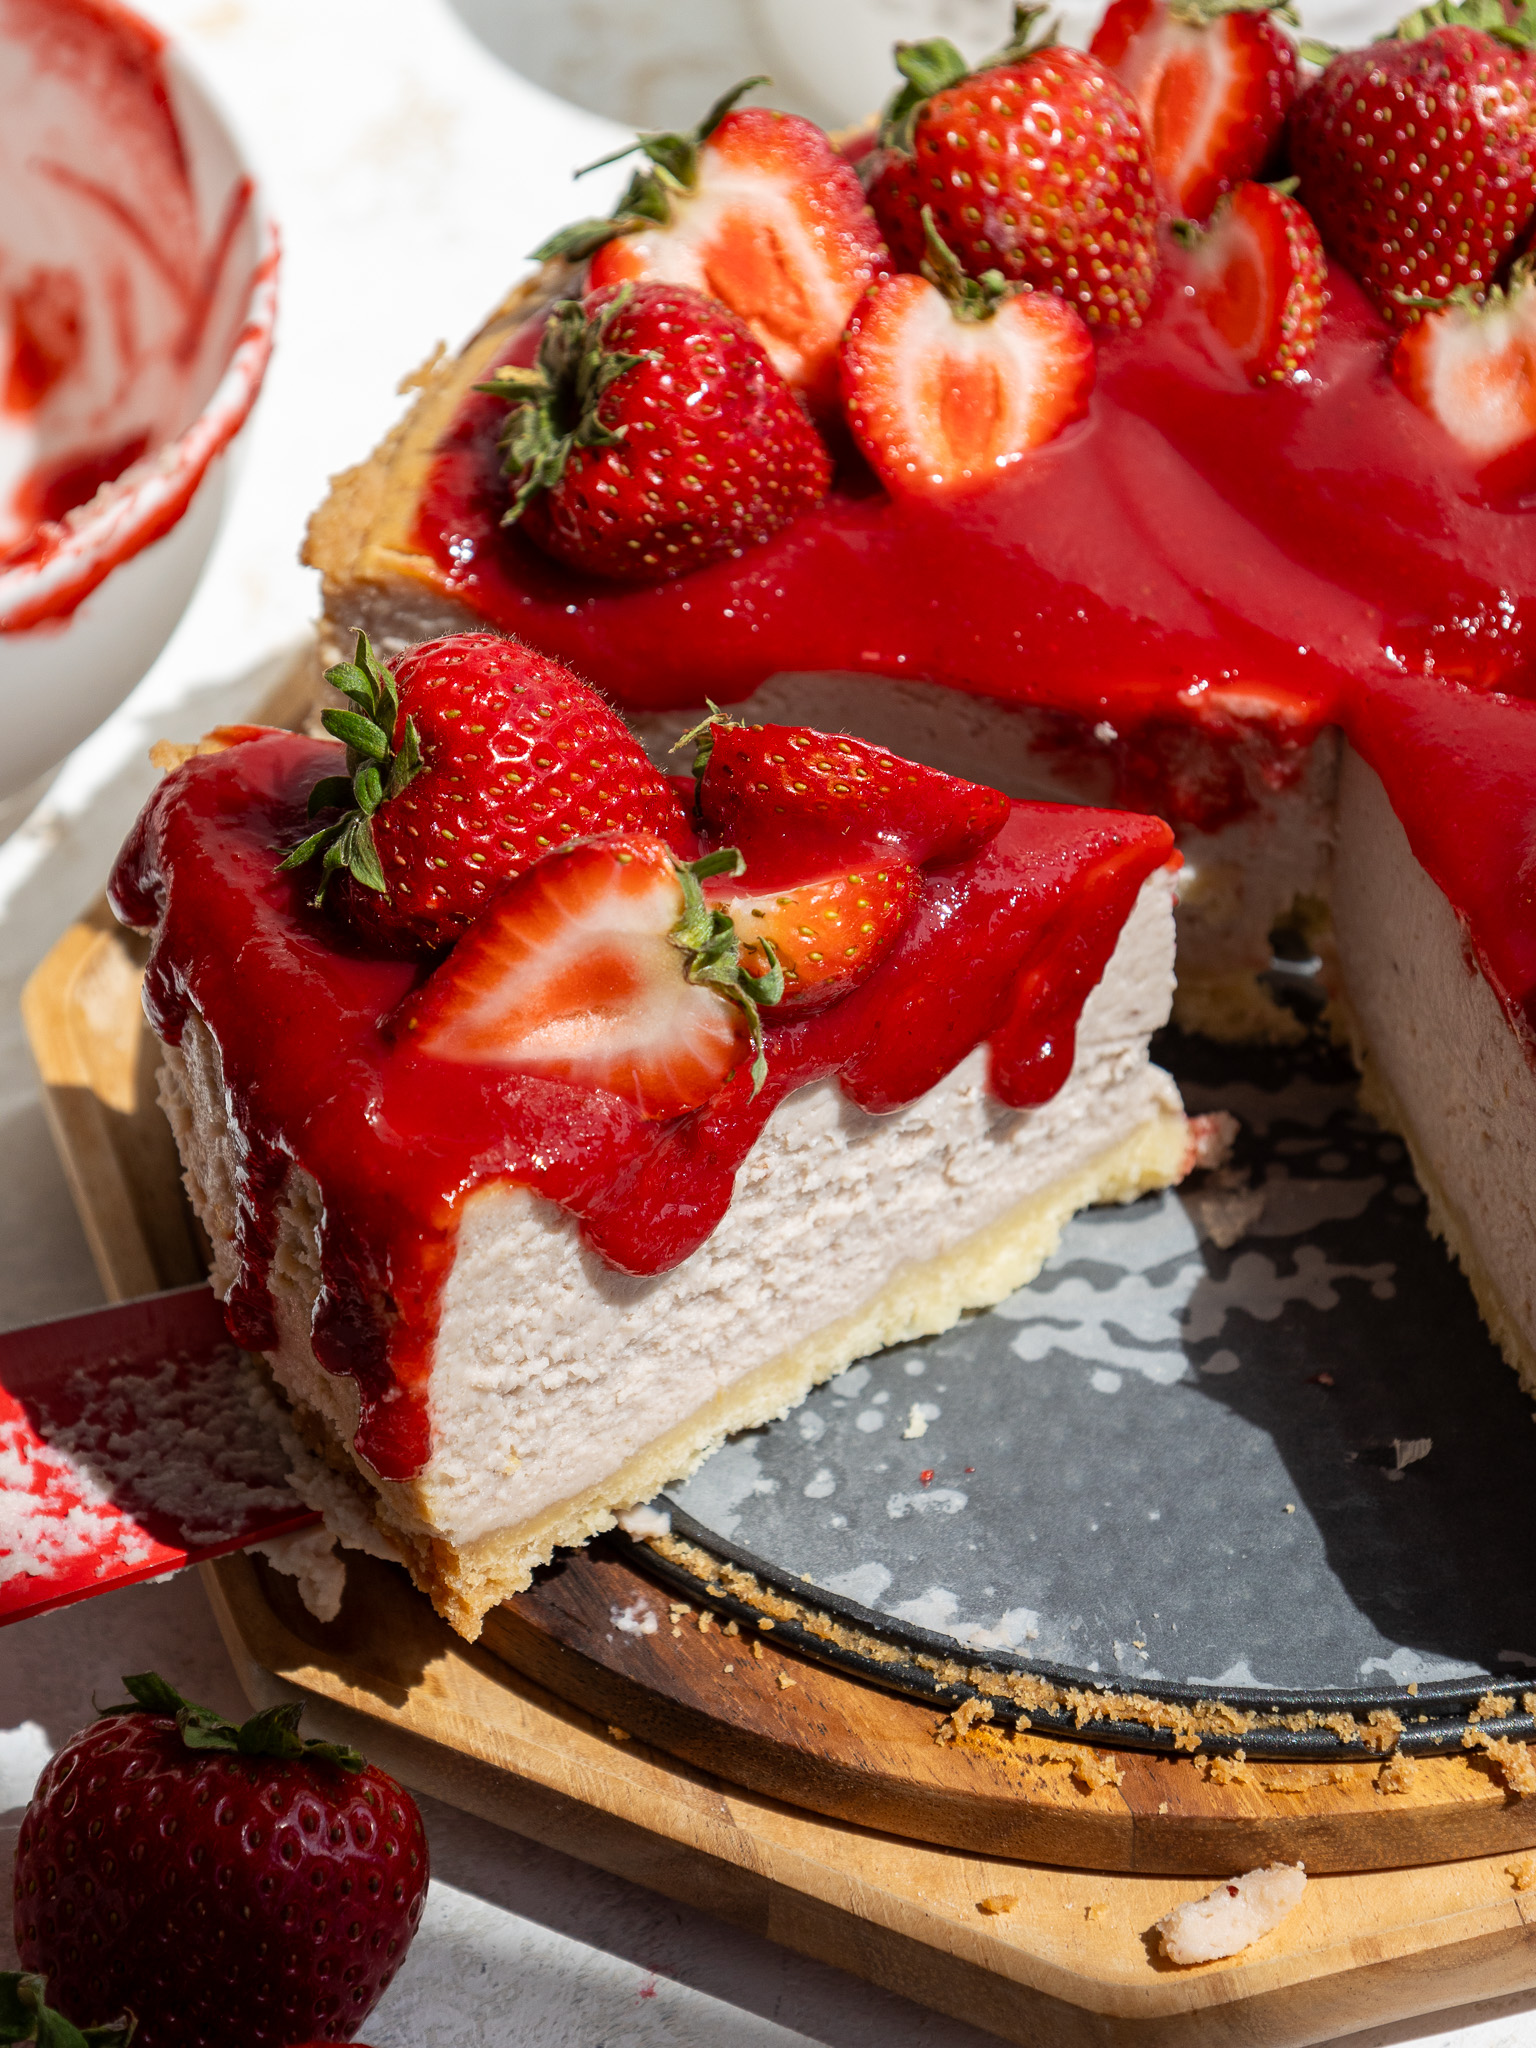 image of a slice of strawberry cheesecake being cut